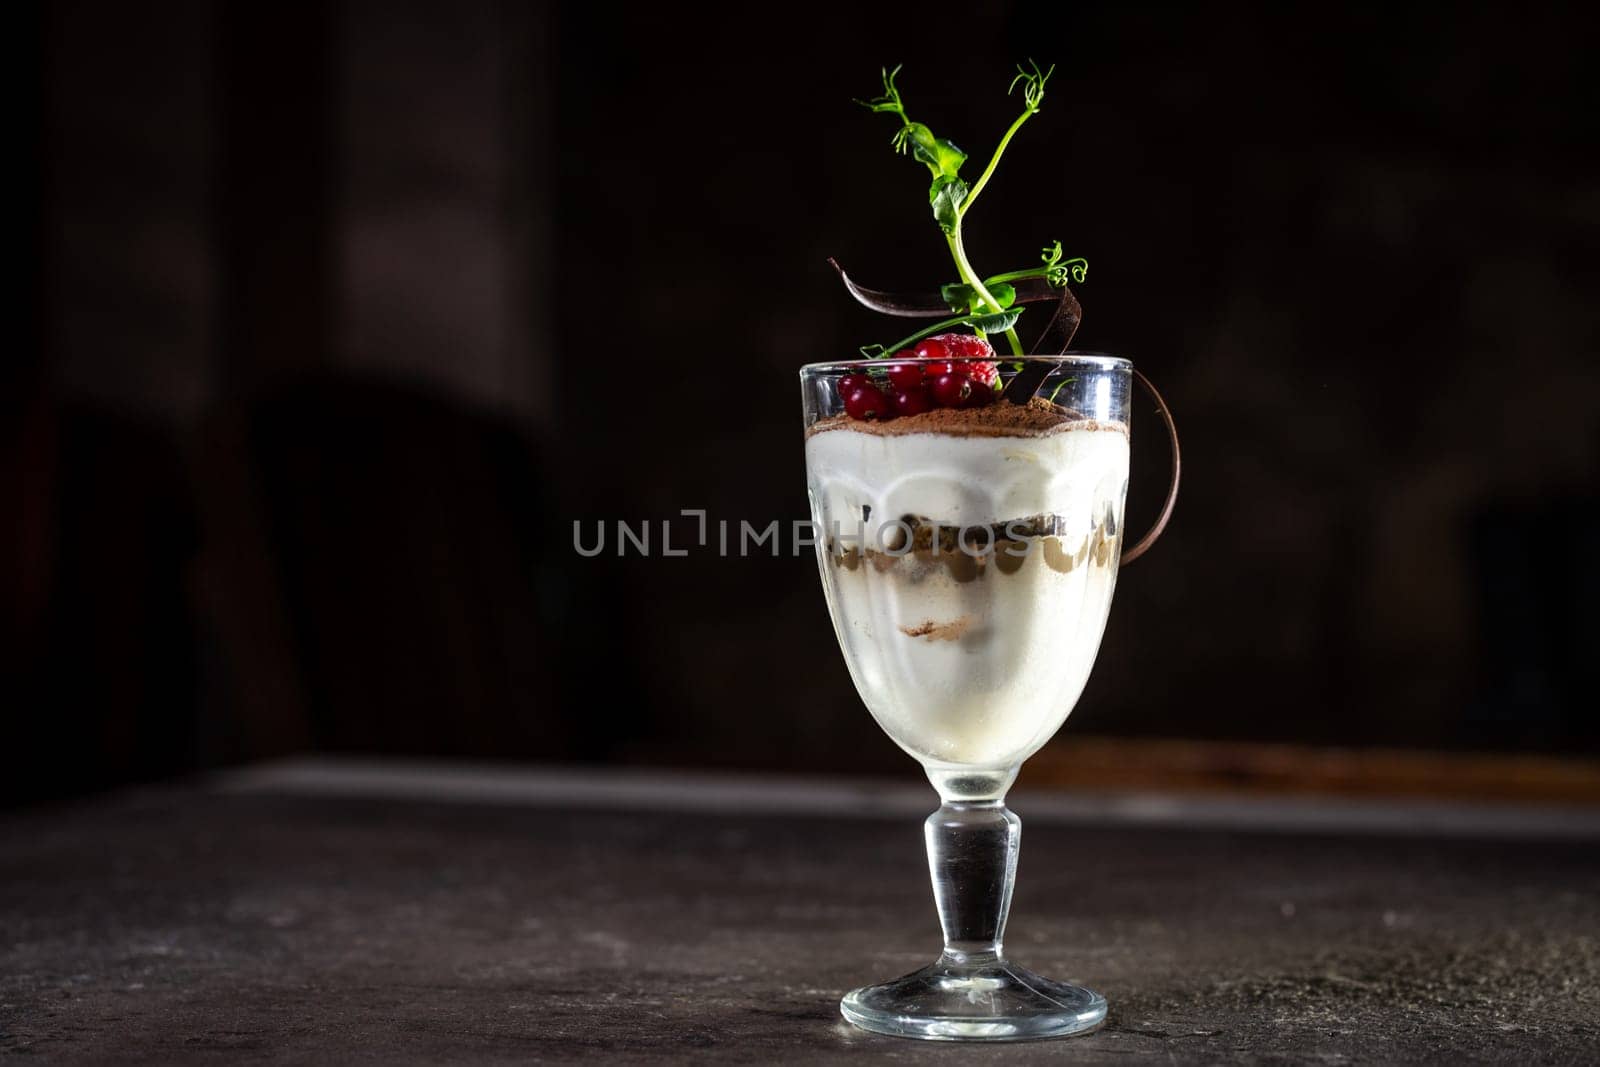 tiramisu dessert with berries in a glass on the table.